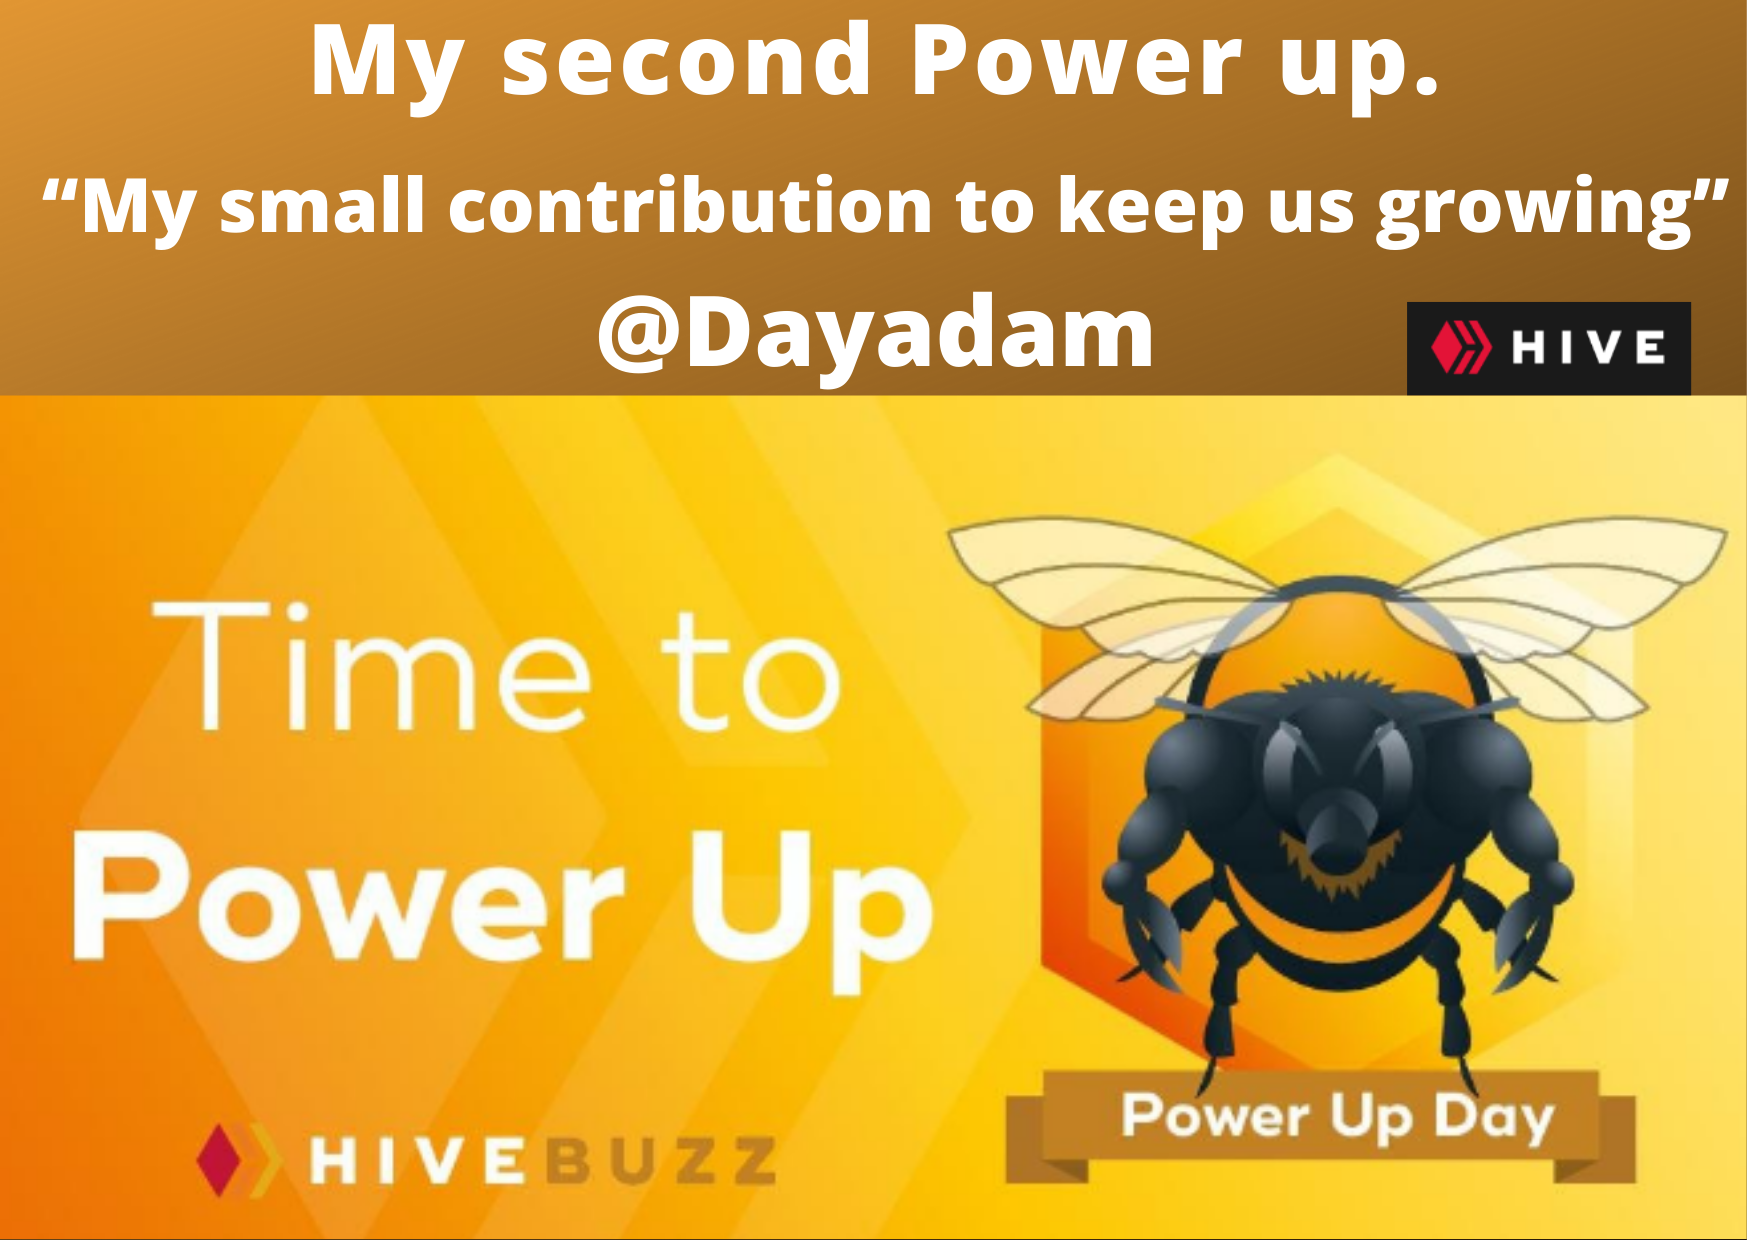 @dayadam/my-second-power-up-my-small-contribution-to-keep-us-growing-engesp